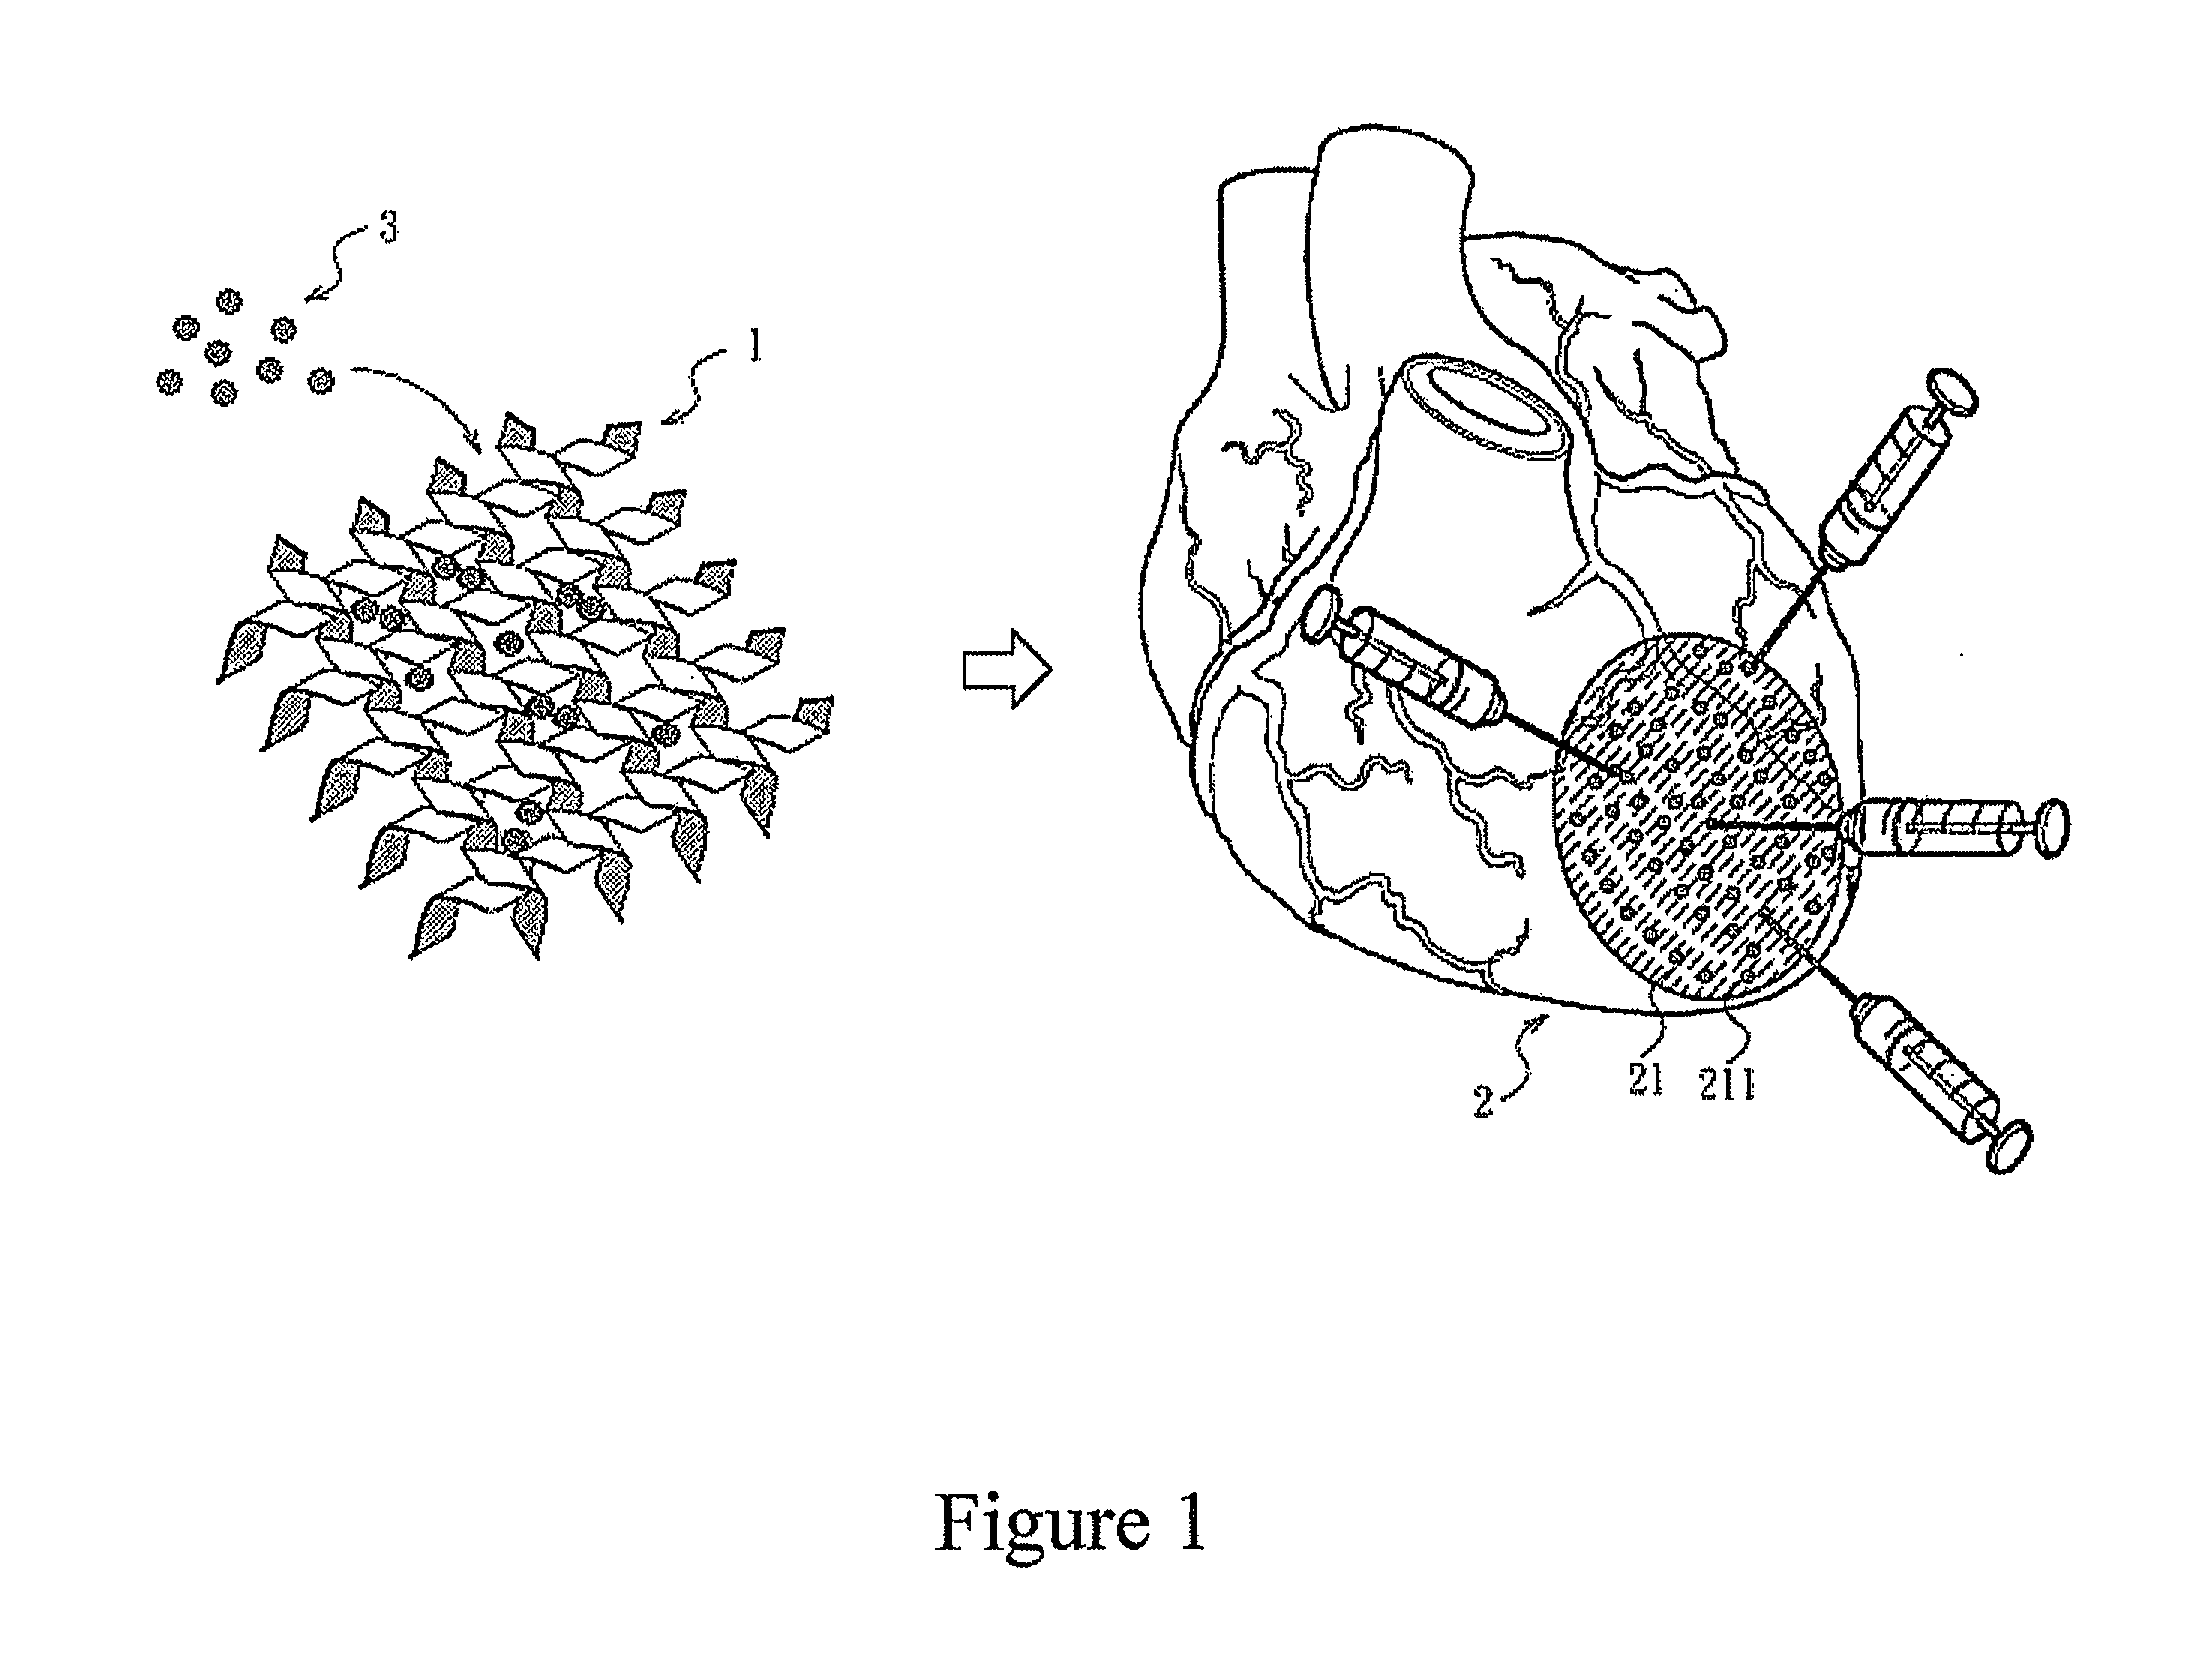 Pharmaceutical composition for promoting arteriogenesis, and preparation method and applications for the same